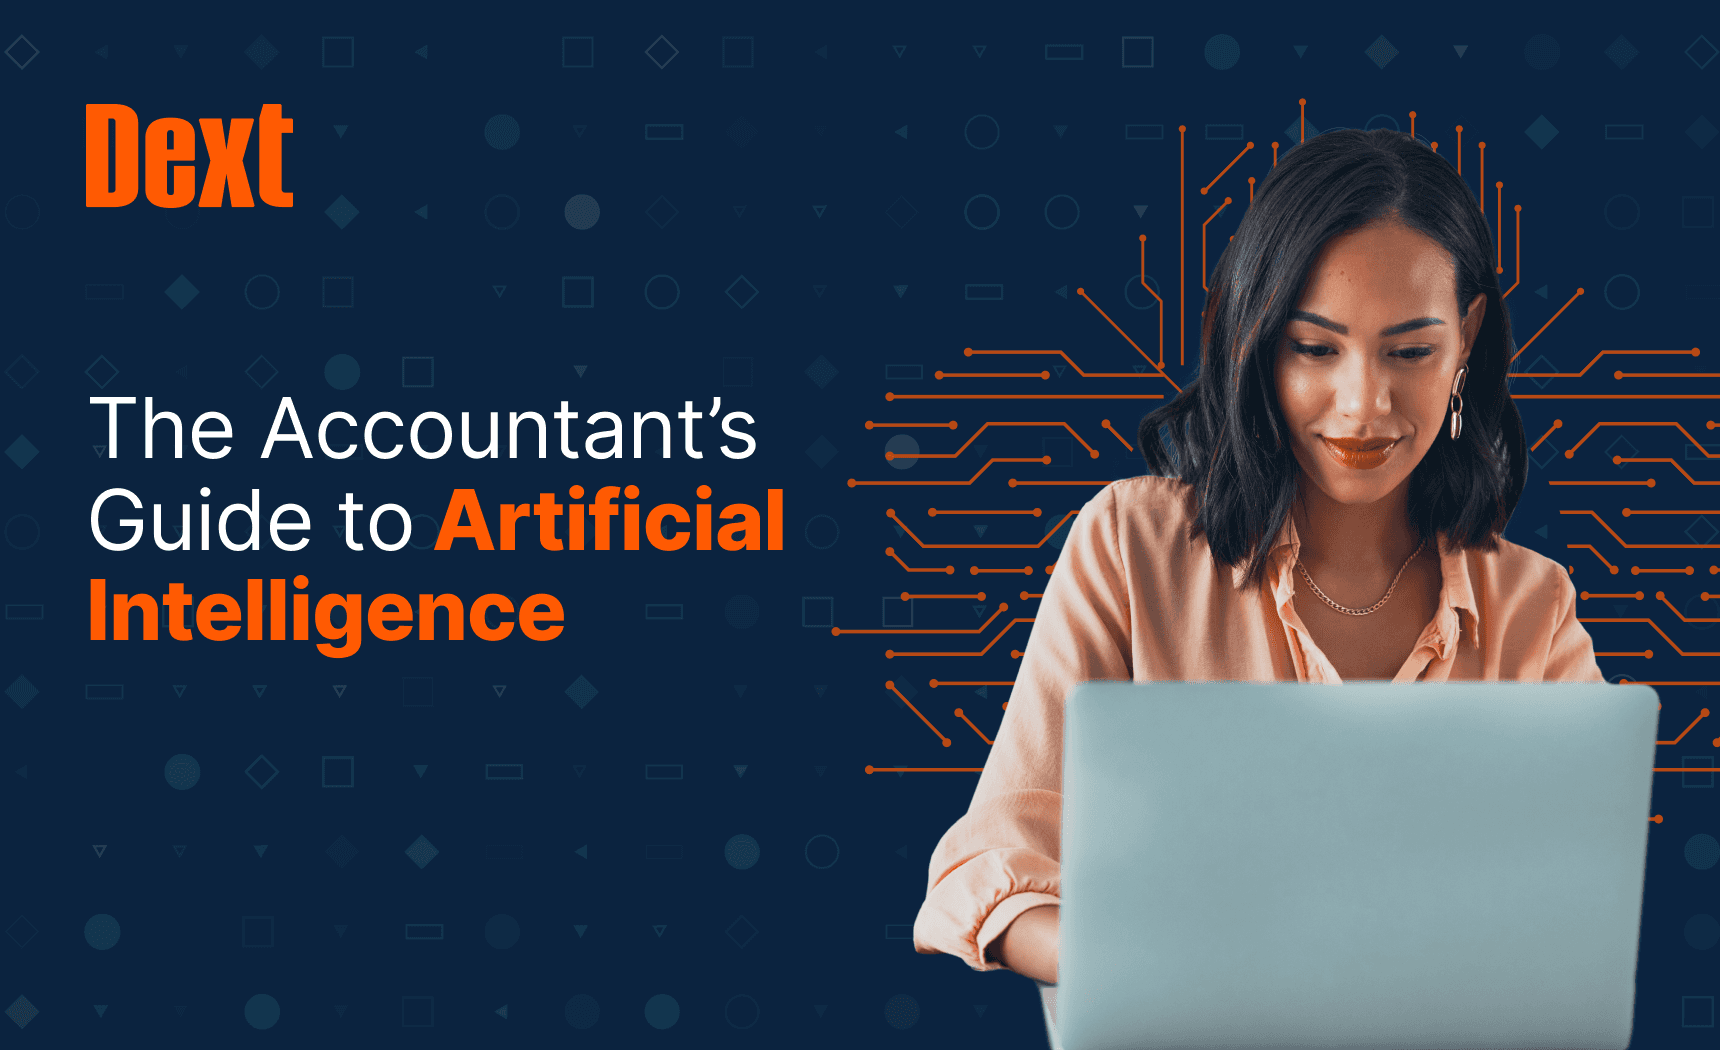 The Accountant’s Guide to Artificial Intelligence